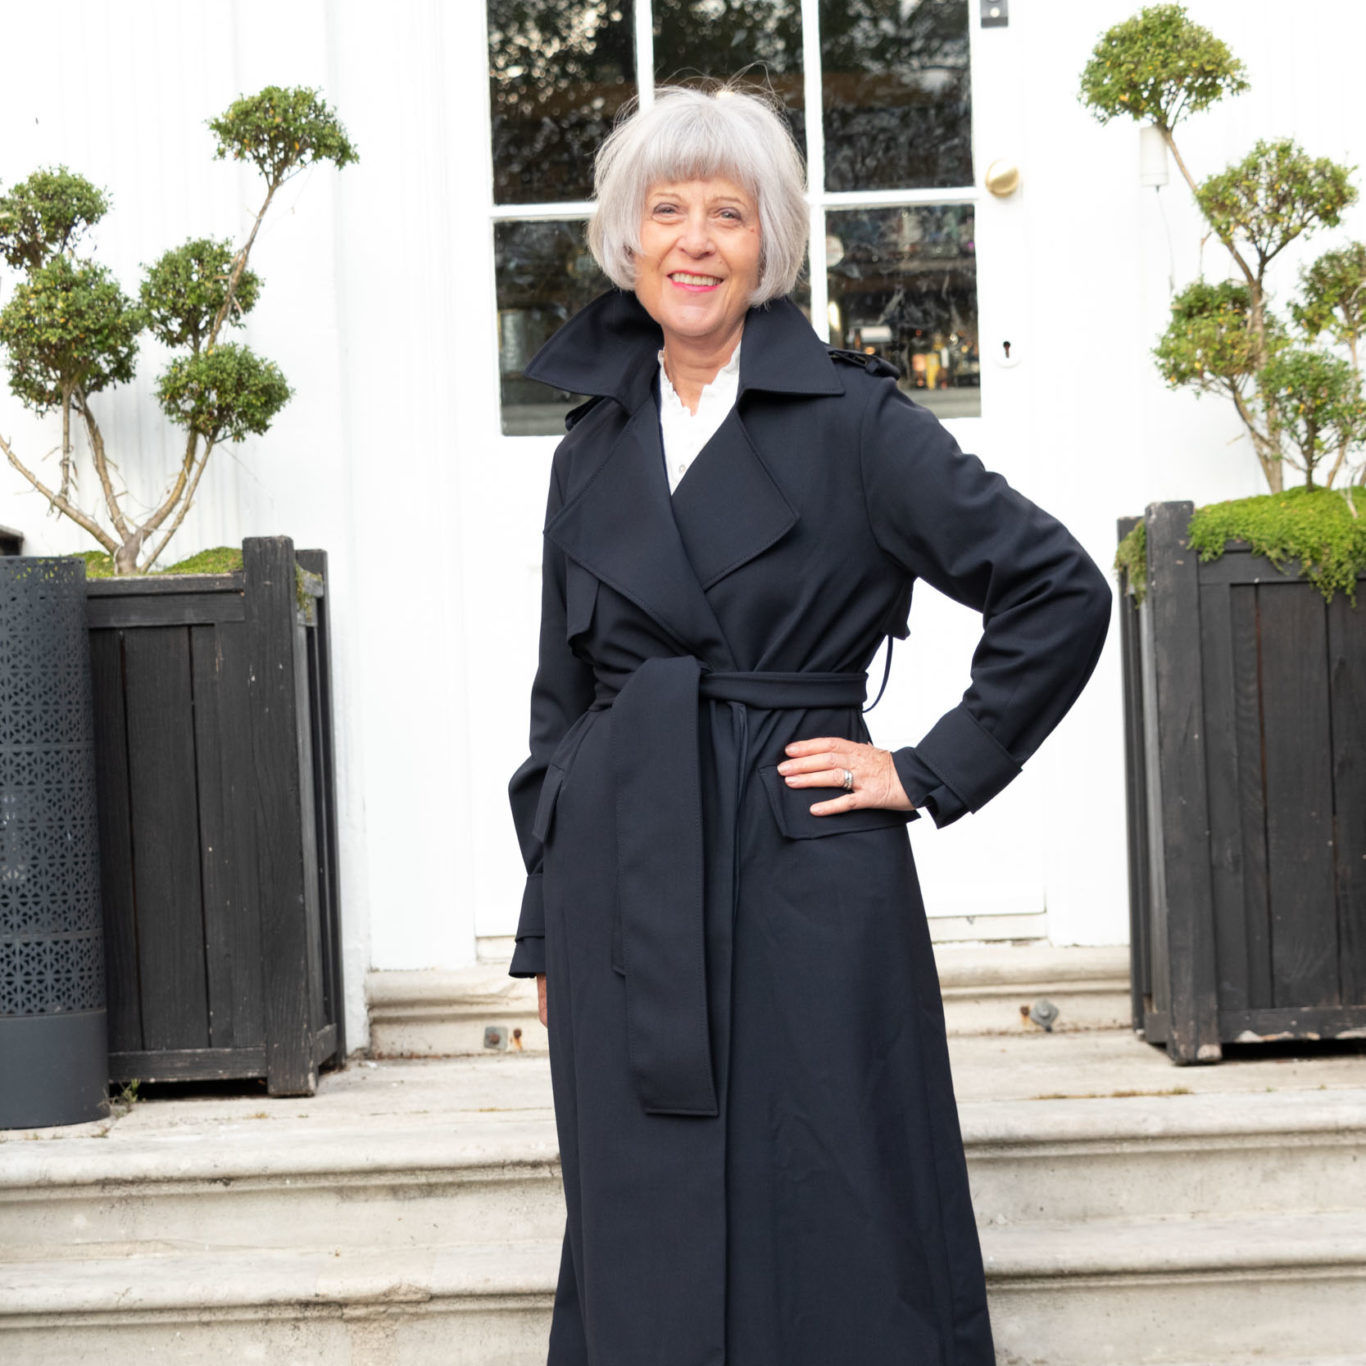 A new version of the classic trench coat - Chic at any age